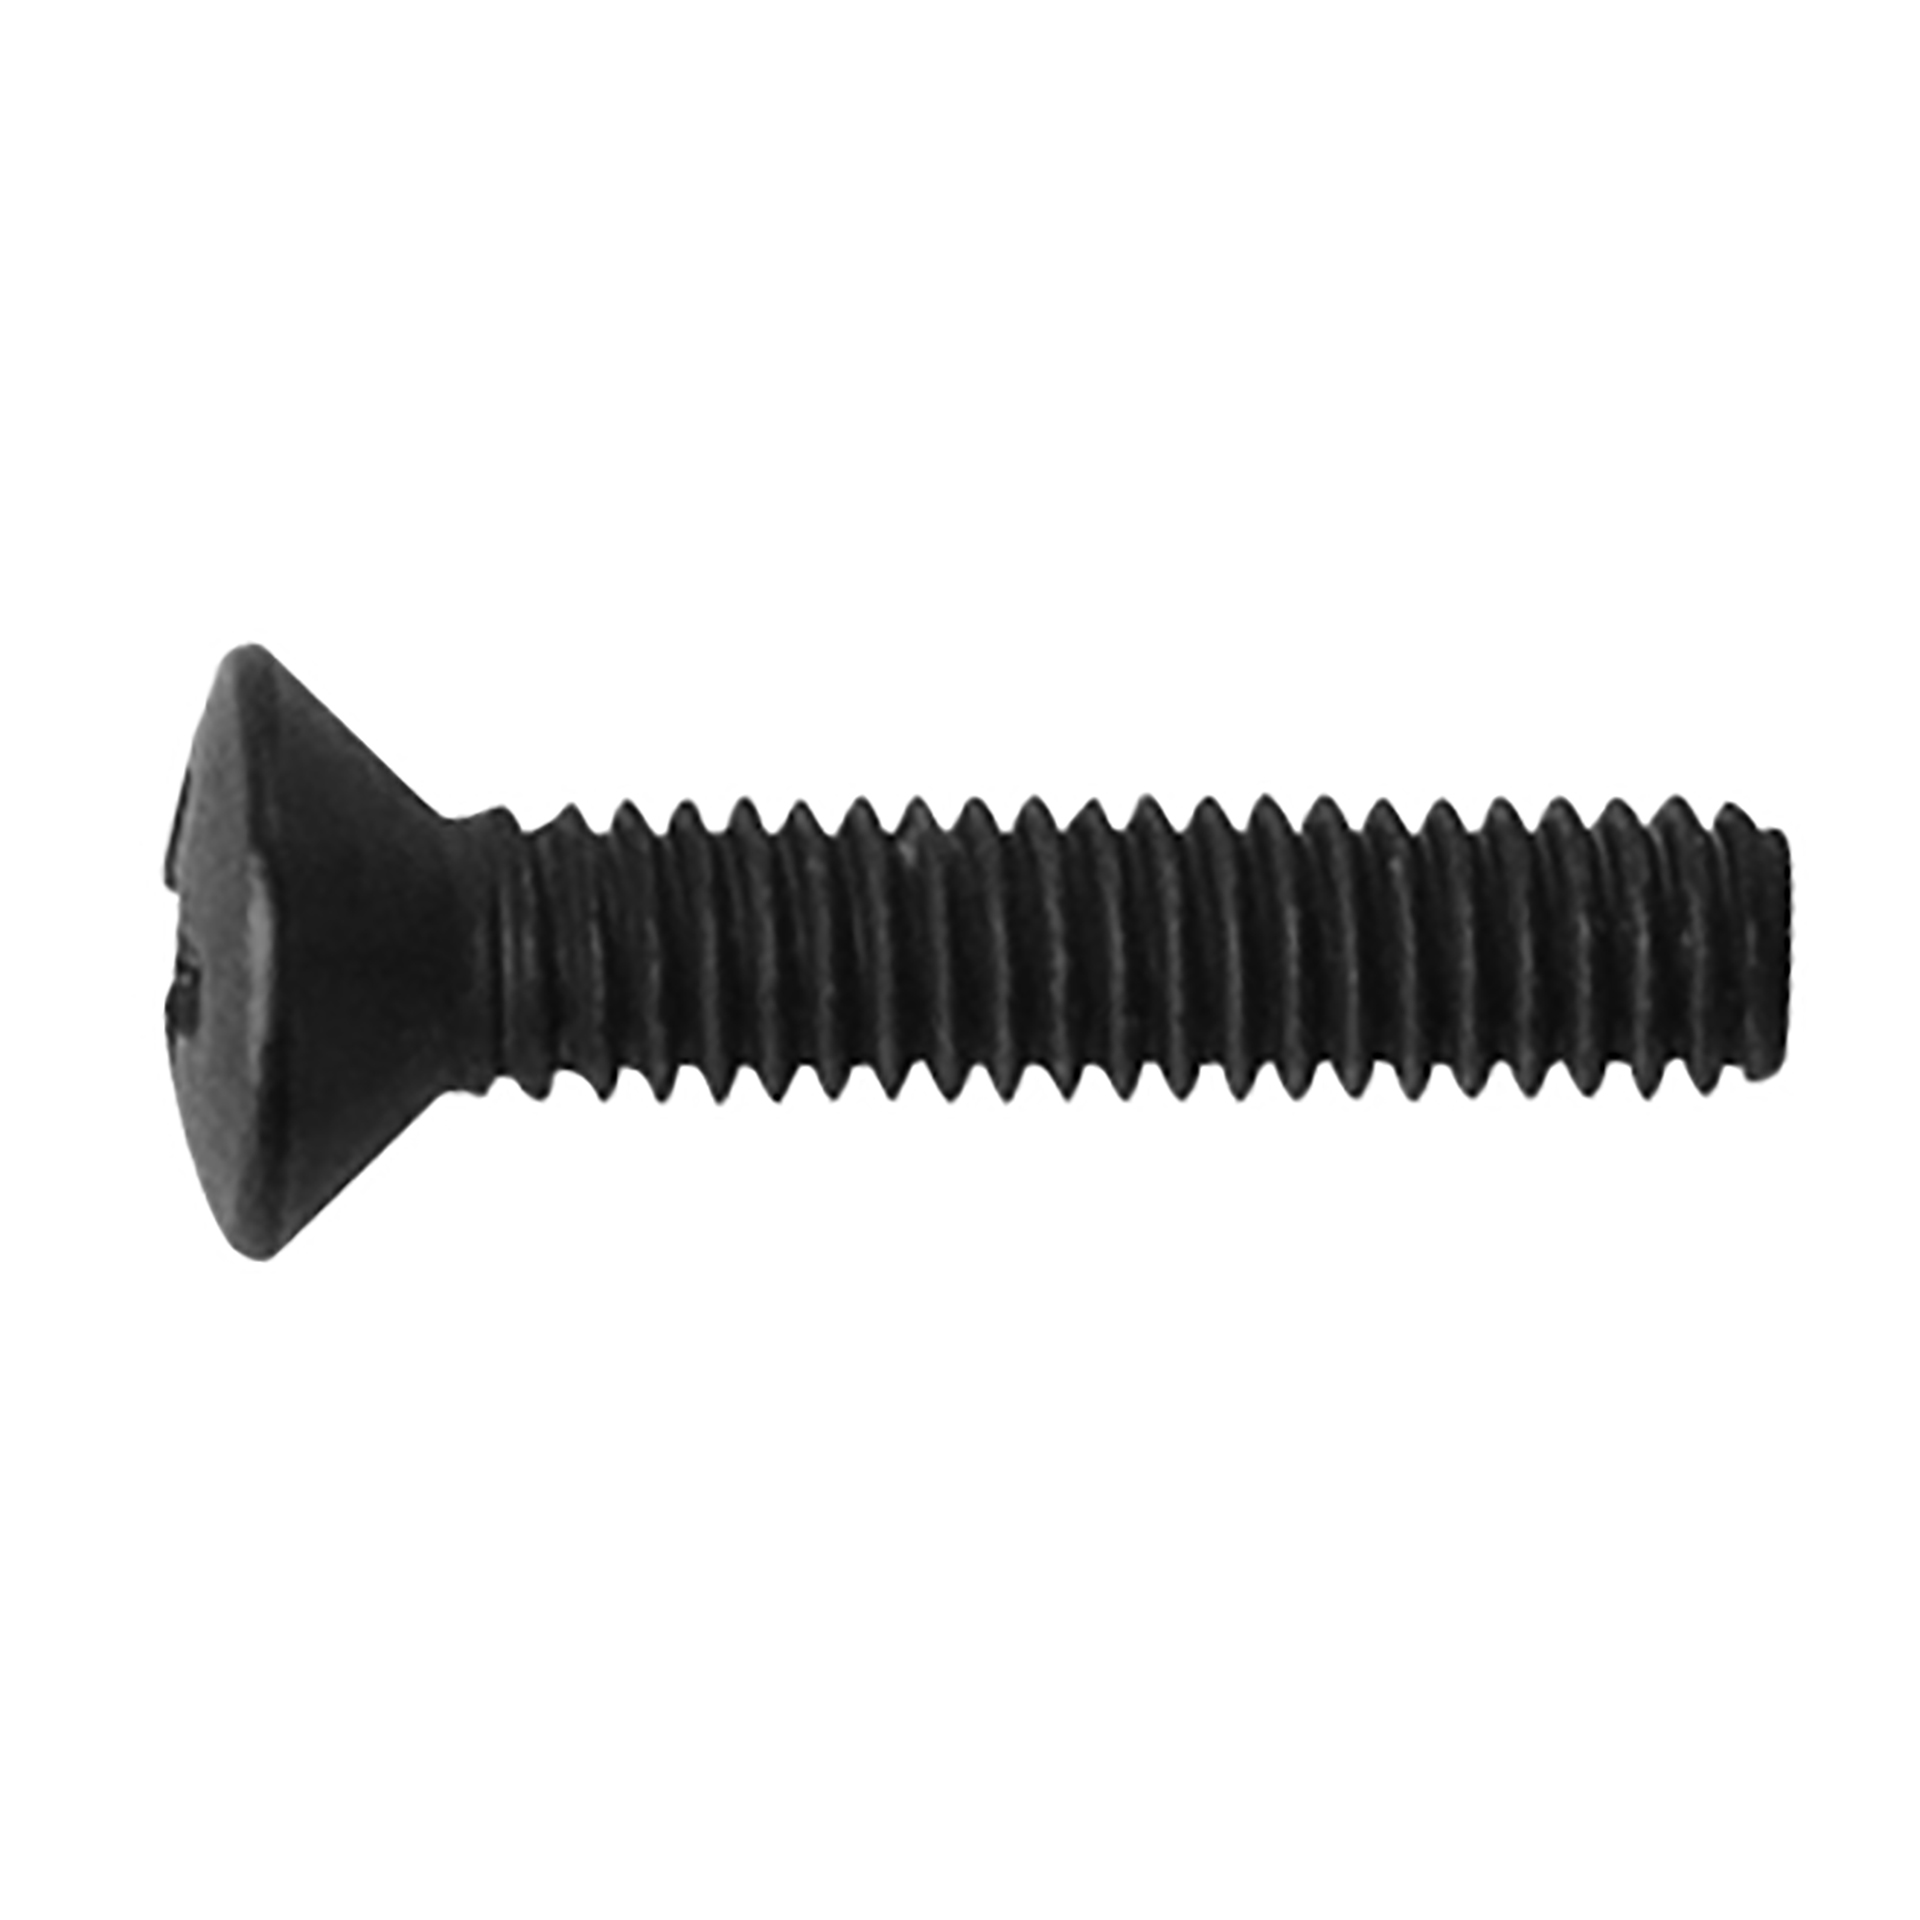 Sadowsky Parts - Countersunk Screw for Electronics Compartment Covers, M 2,5 mm x 12 mm, 4 pcs. - Black